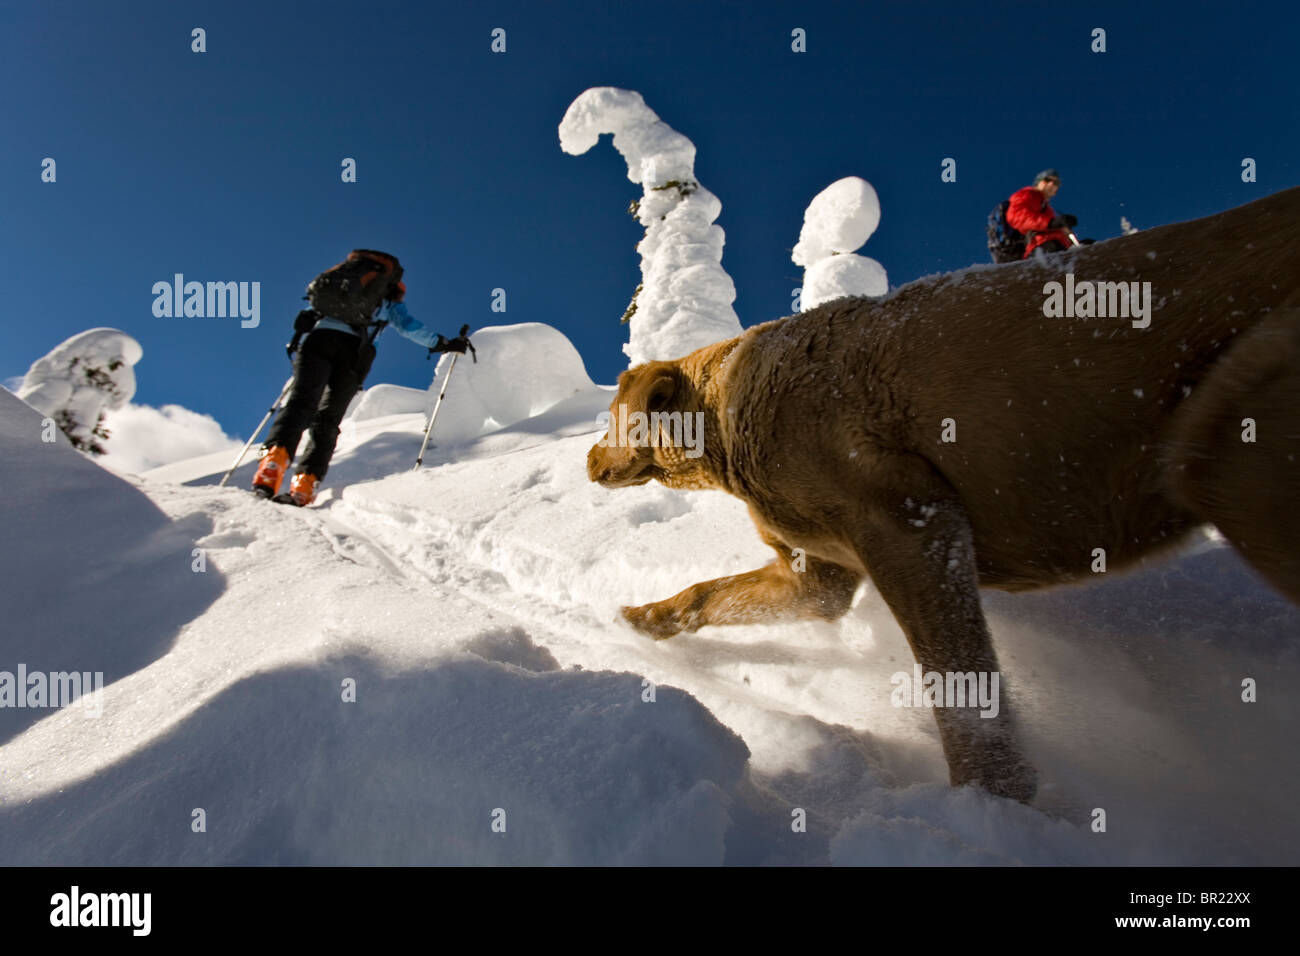 two people and a dog ski touring, Valhalla Mountain Touring Lodge, British Columbia, Canada Stock Photo